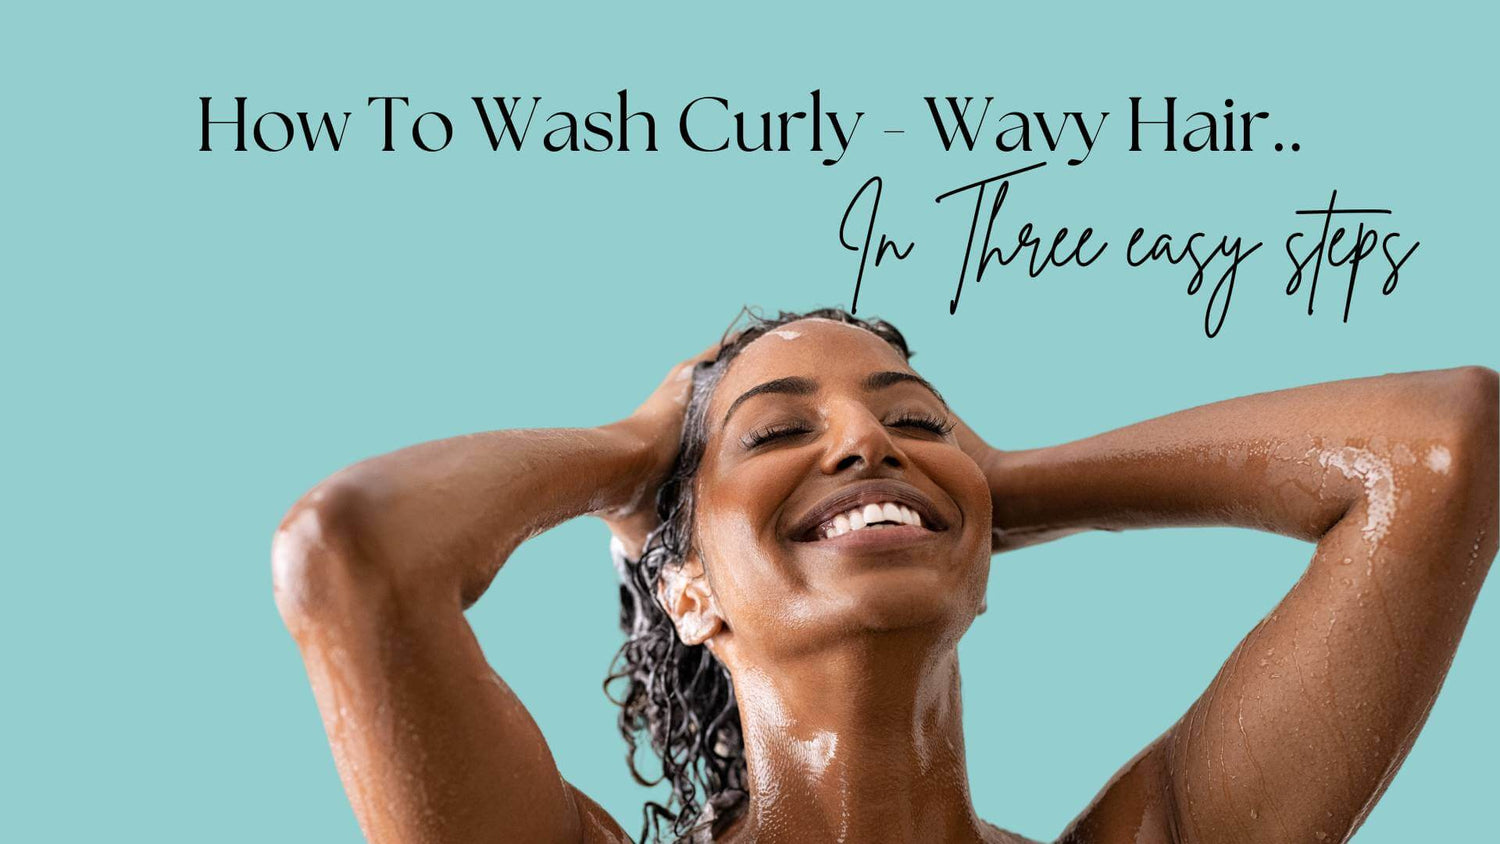 How to wash curly wavy hair